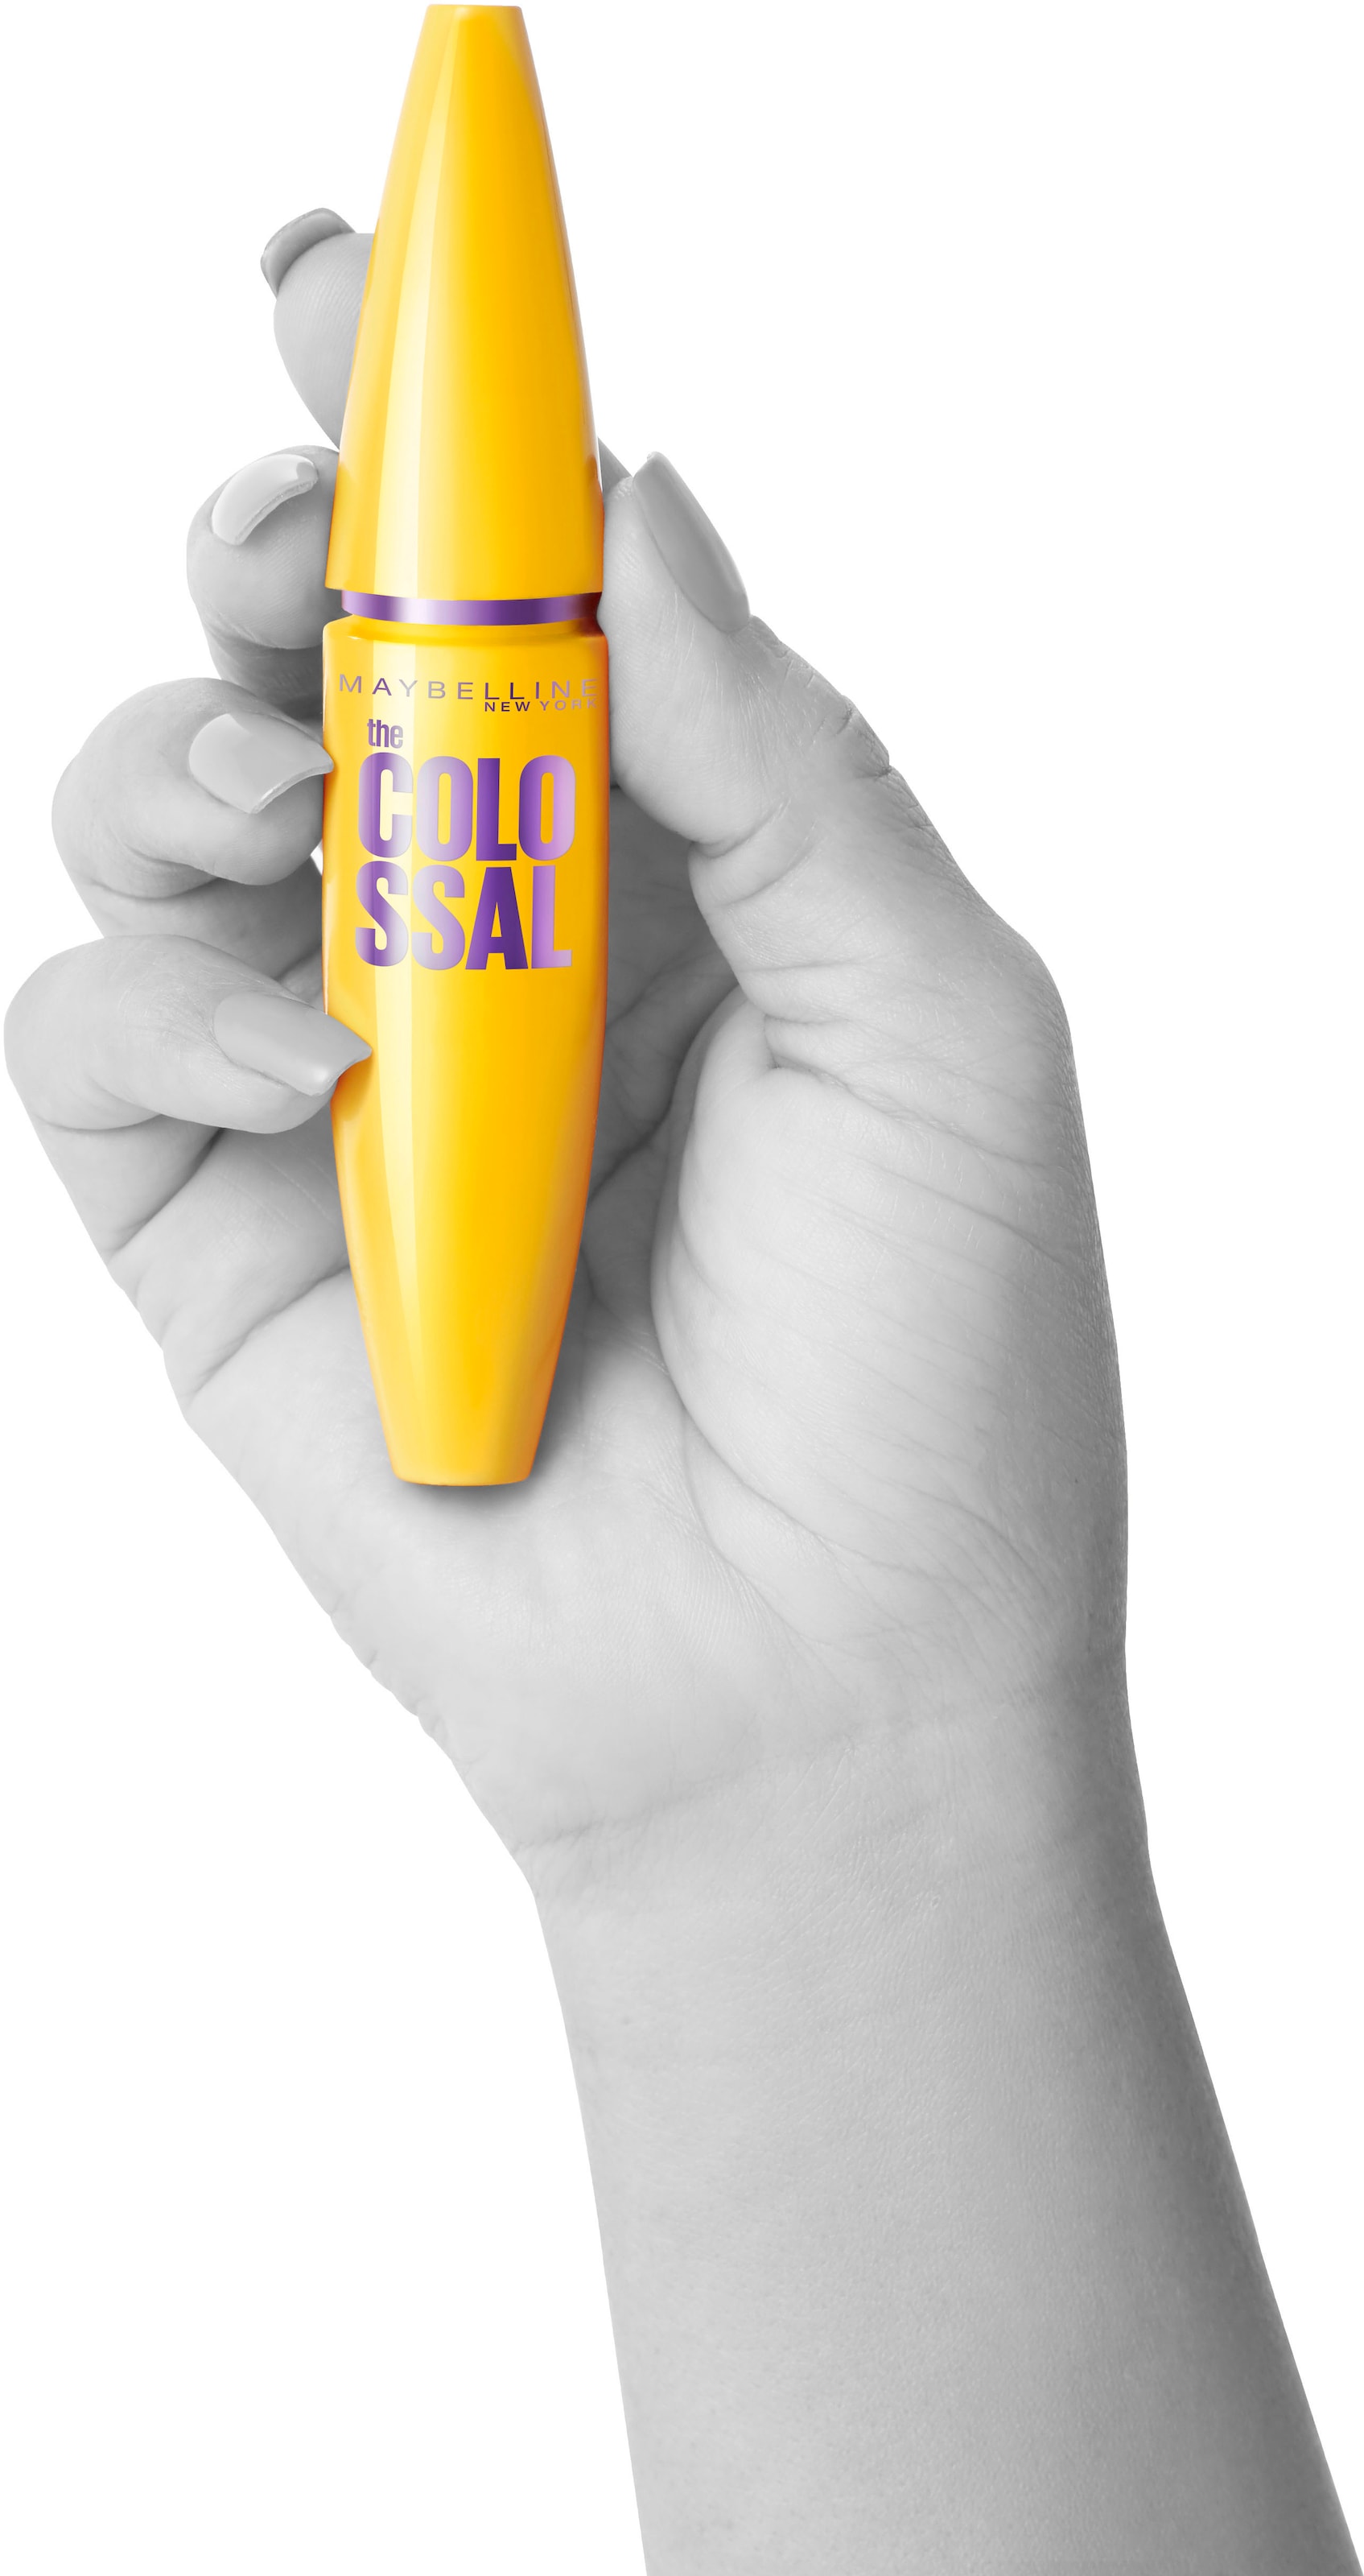 »Volum\' ♕ bei Express MAYBELLINE Mascara Colossal« The NEW YORK